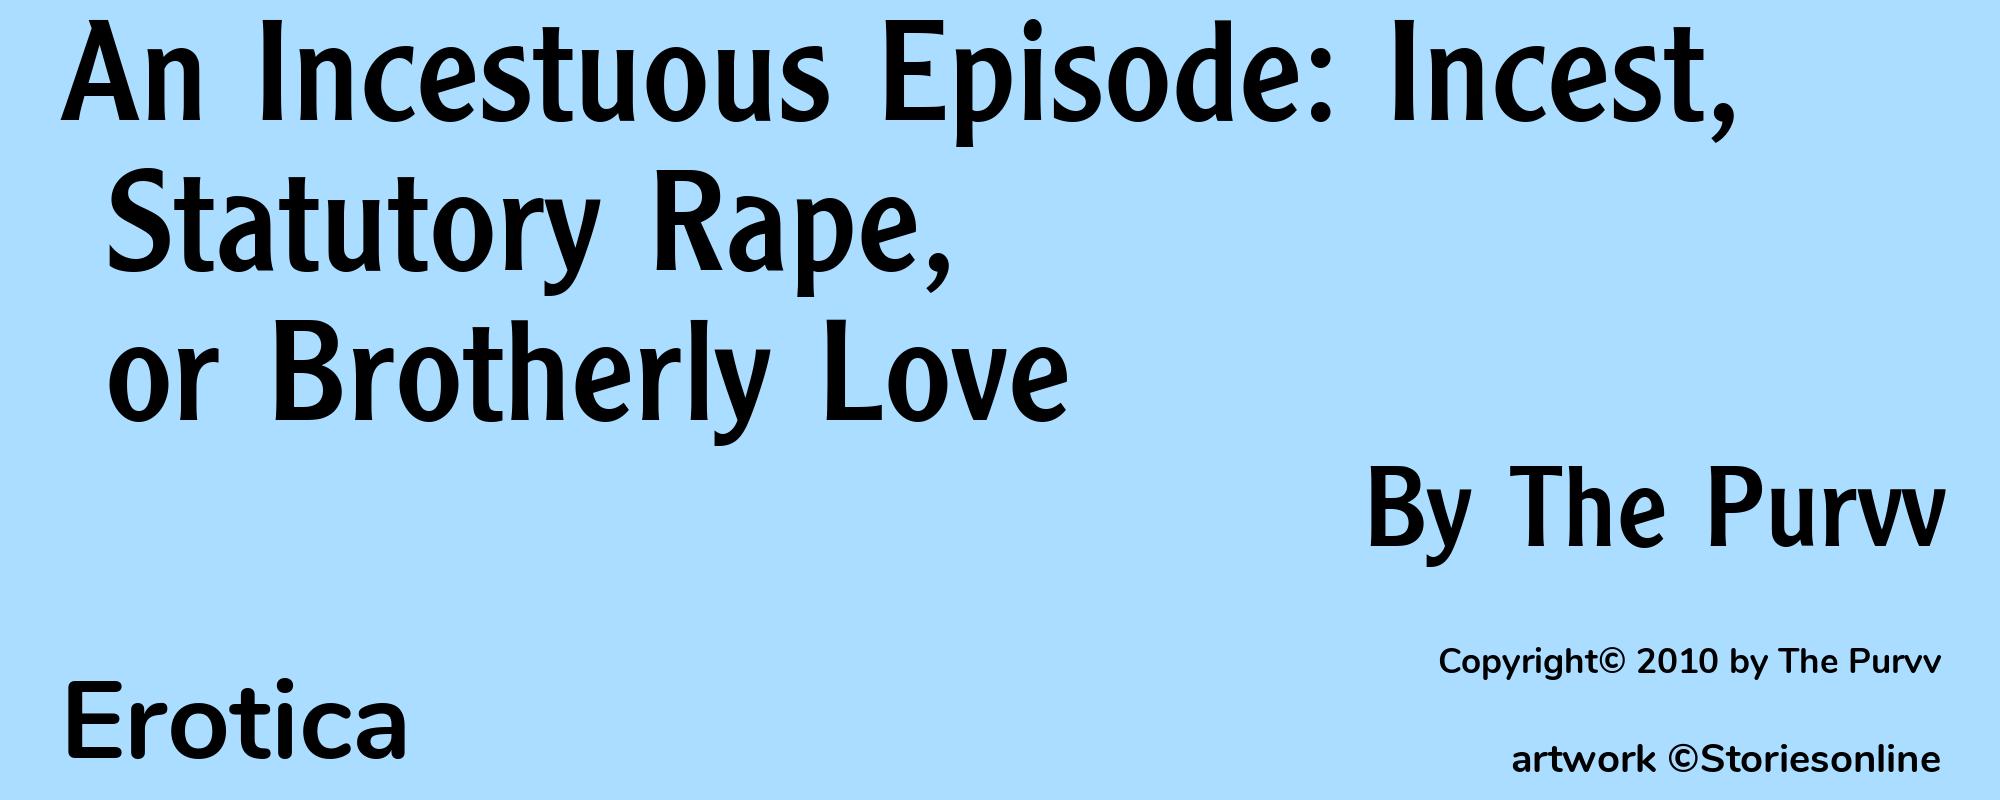 An Incestuous Episode: Incest, Statutory Rape, or Brotherly Love - Cover